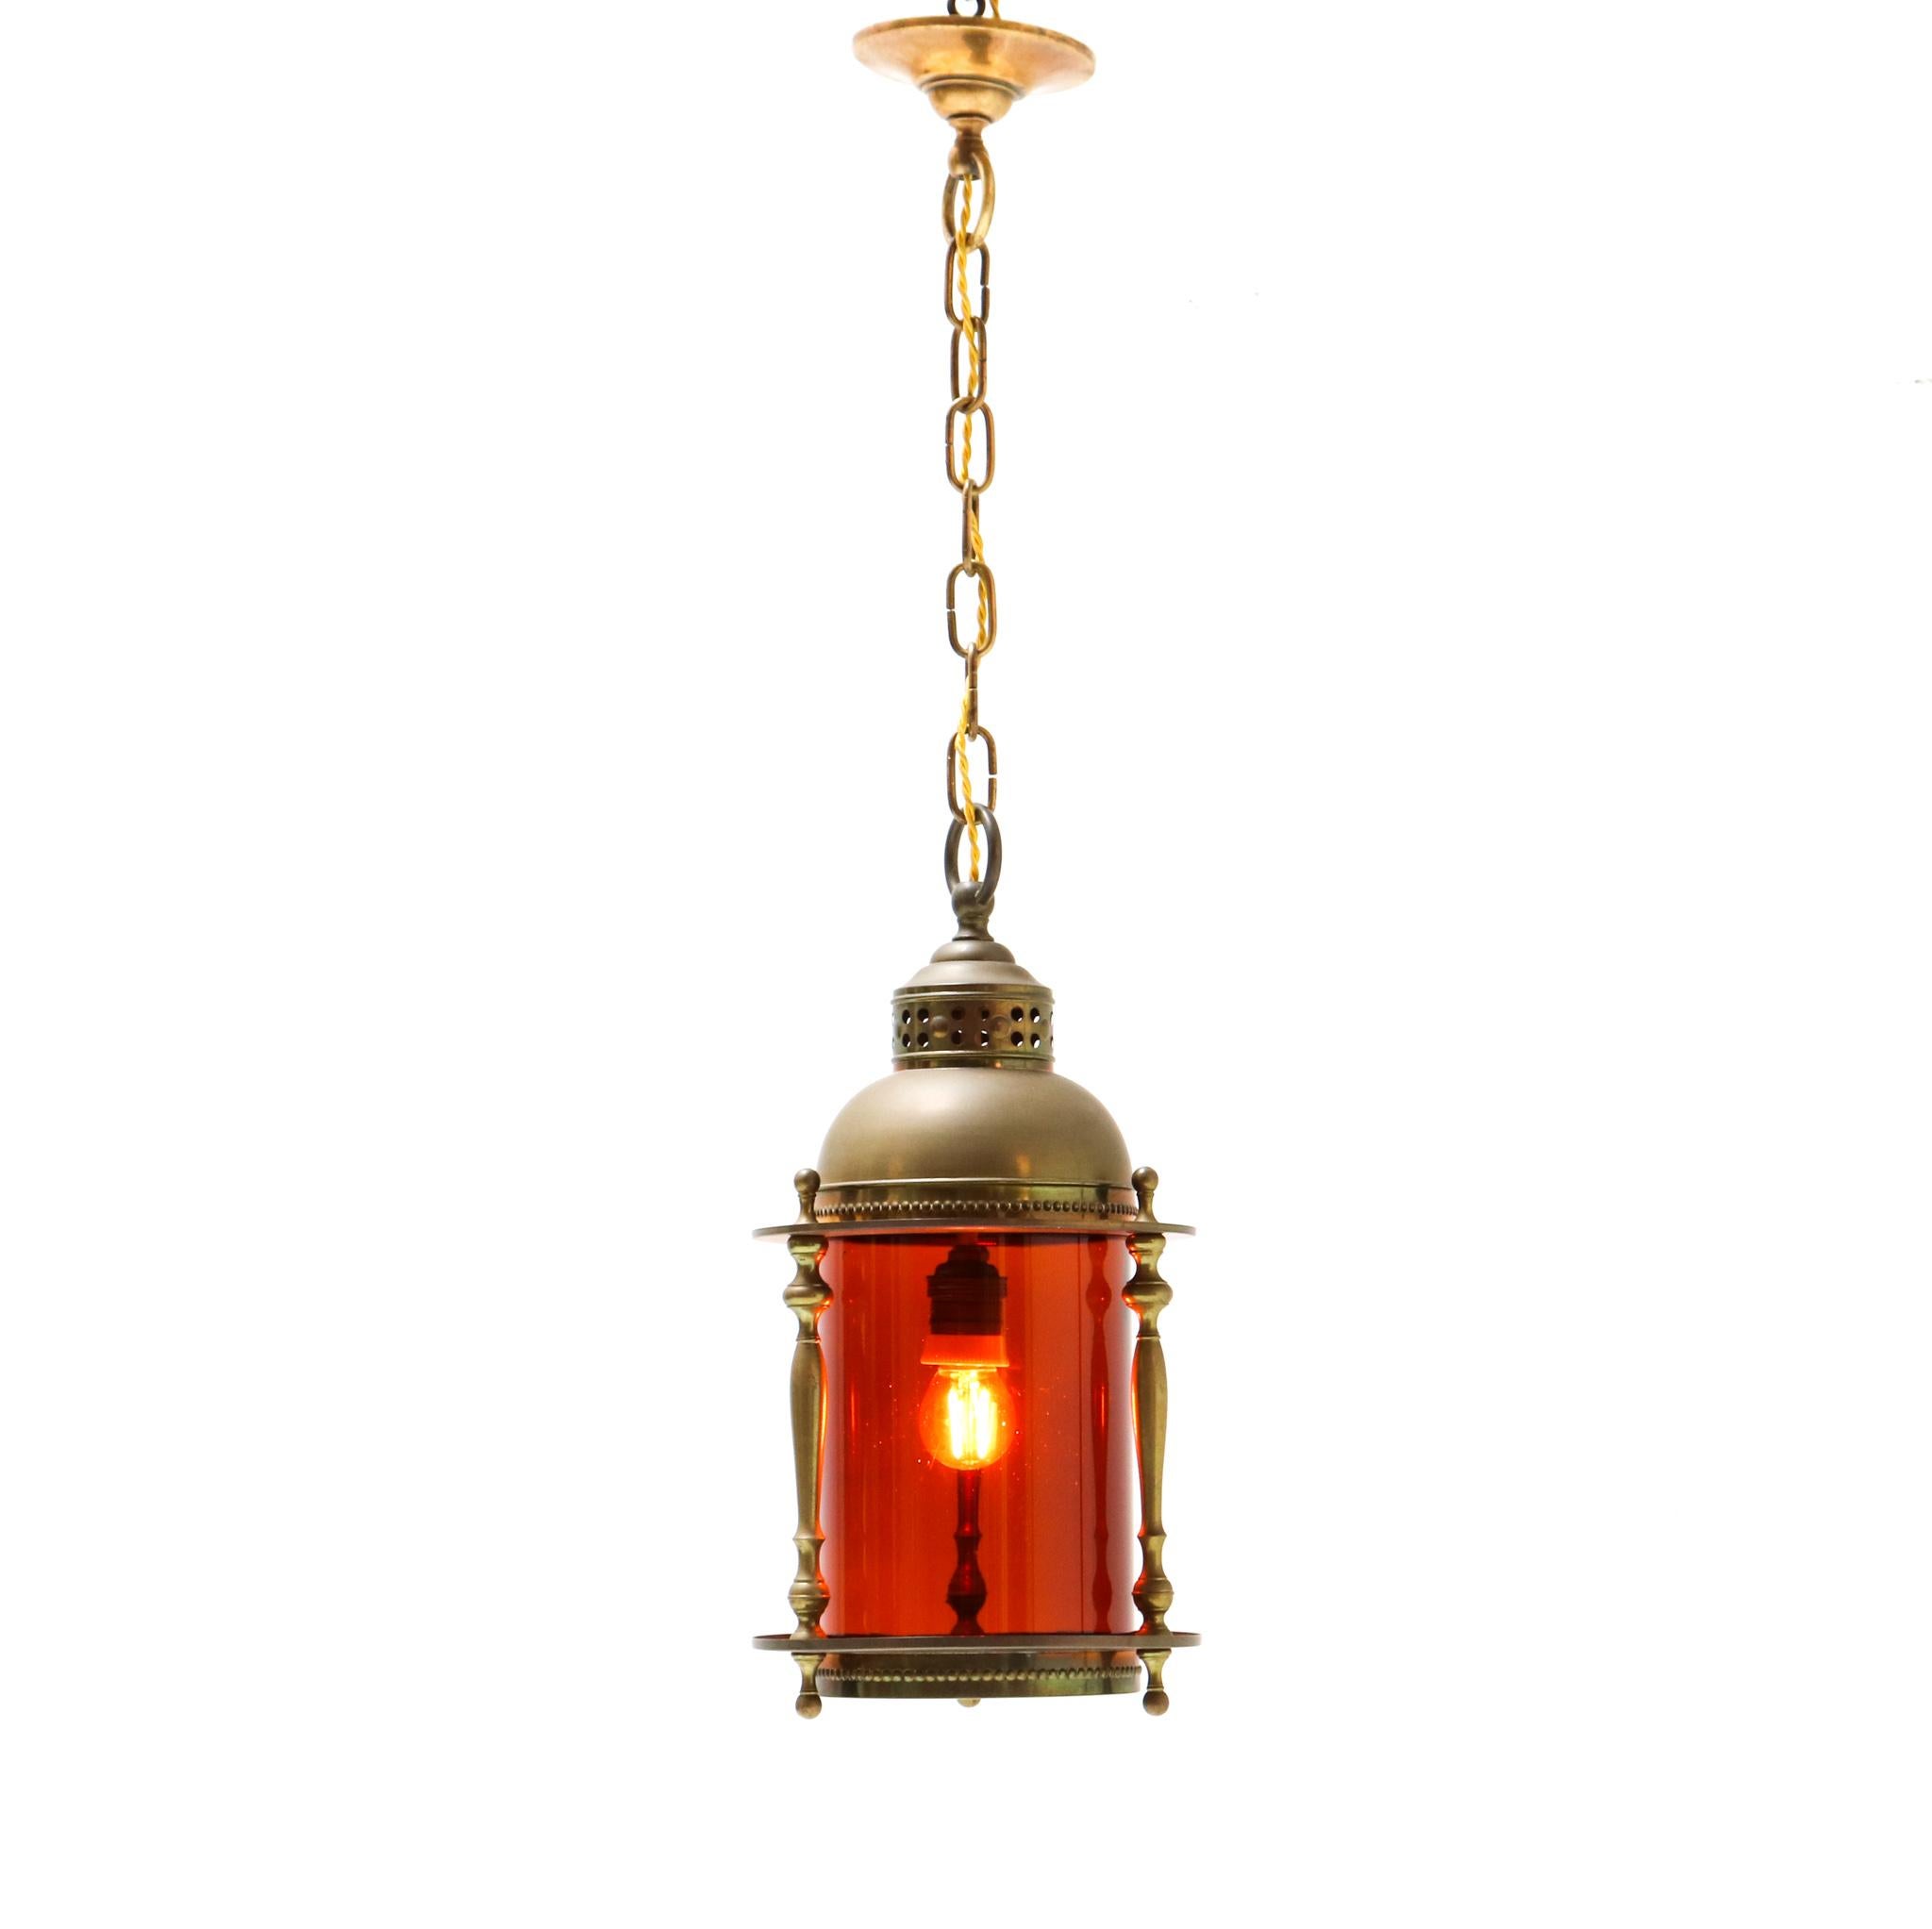 Patinated Brass Art Nouveau Lantern with Original Glass Shade, 1900s For Sale 3